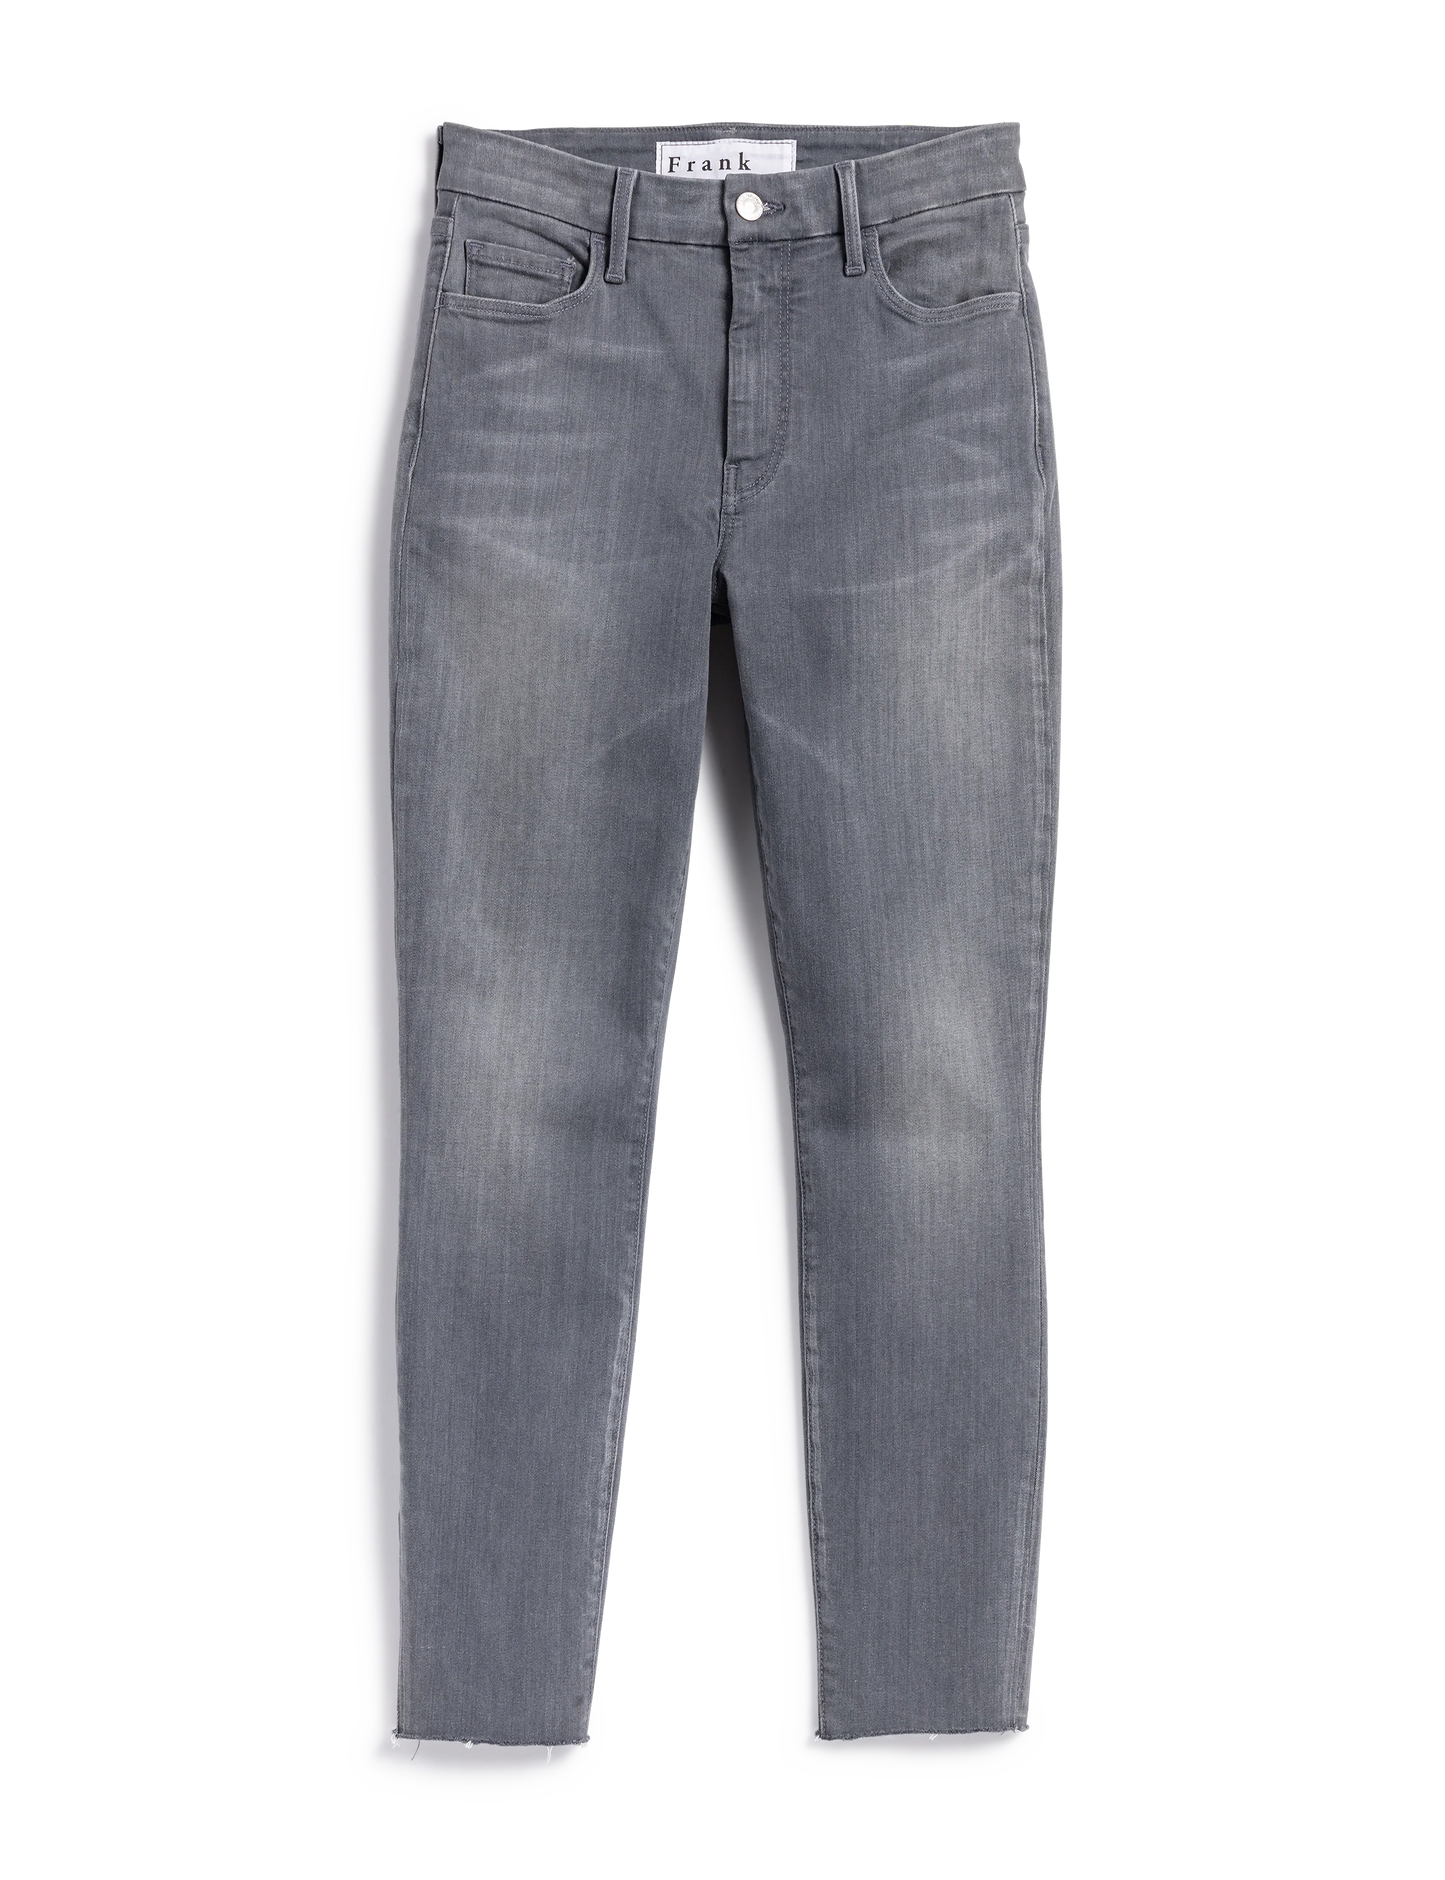 THE EASY FIT JEAN IN 2022 WASH